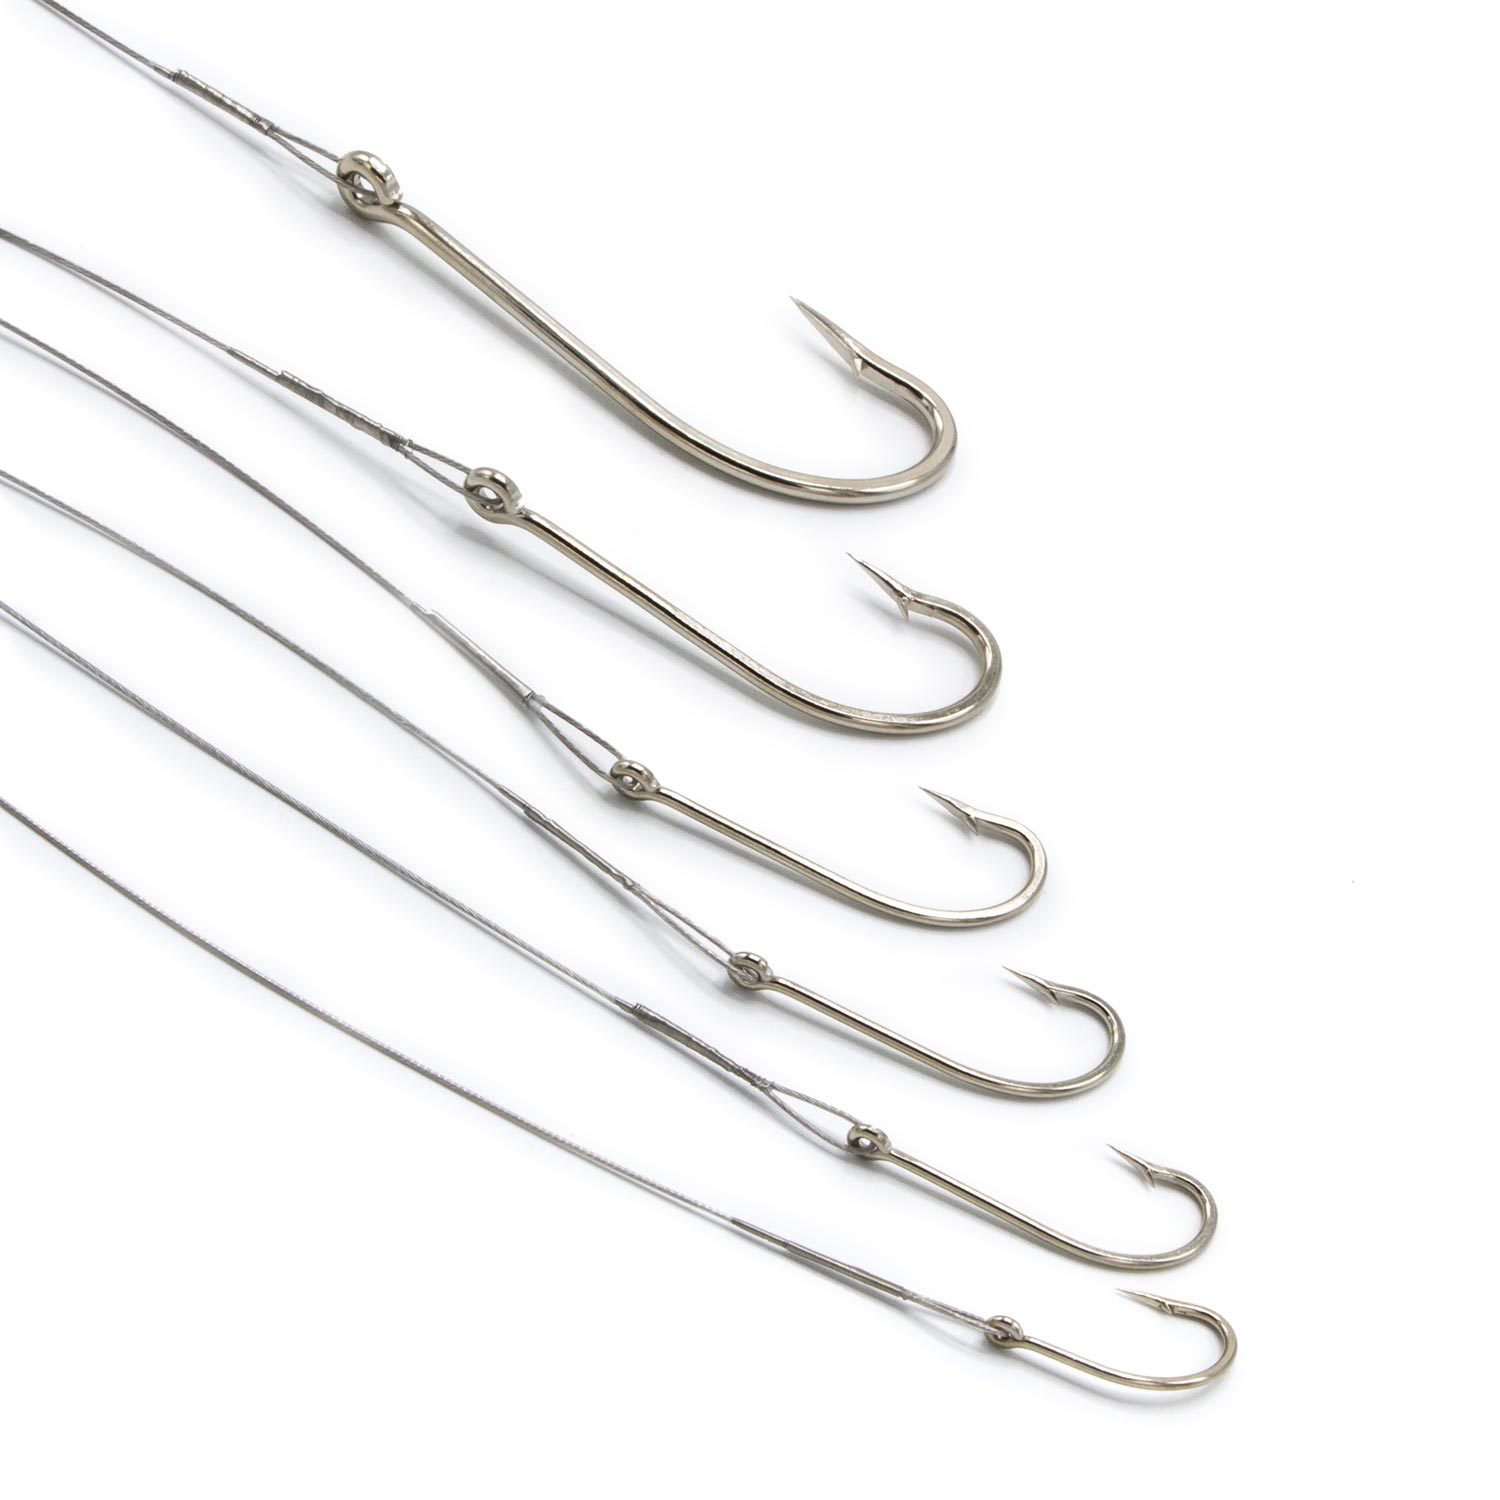 silver wire leader hook rig hook sizes